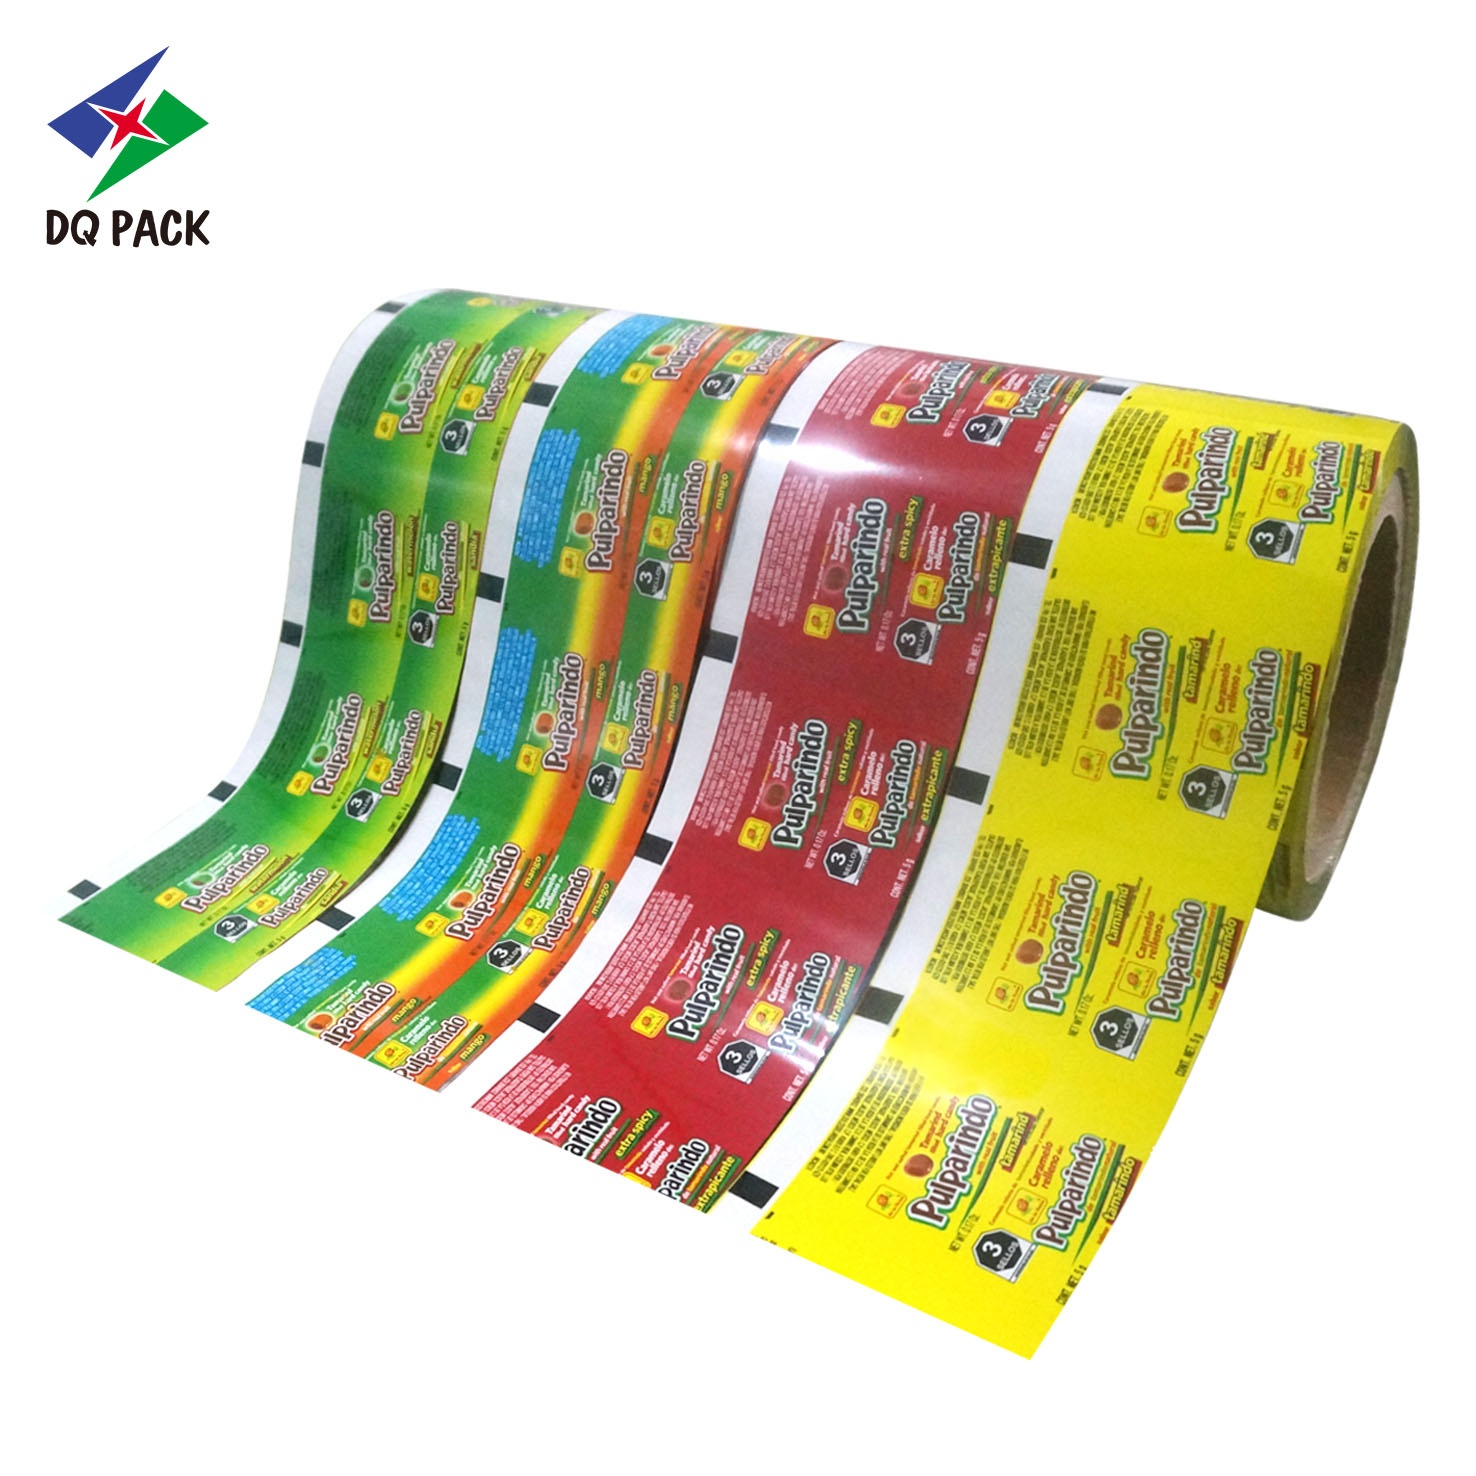 DQ PACK New Arrival Custom Printing Machine Roll Stock For Candy Packaging